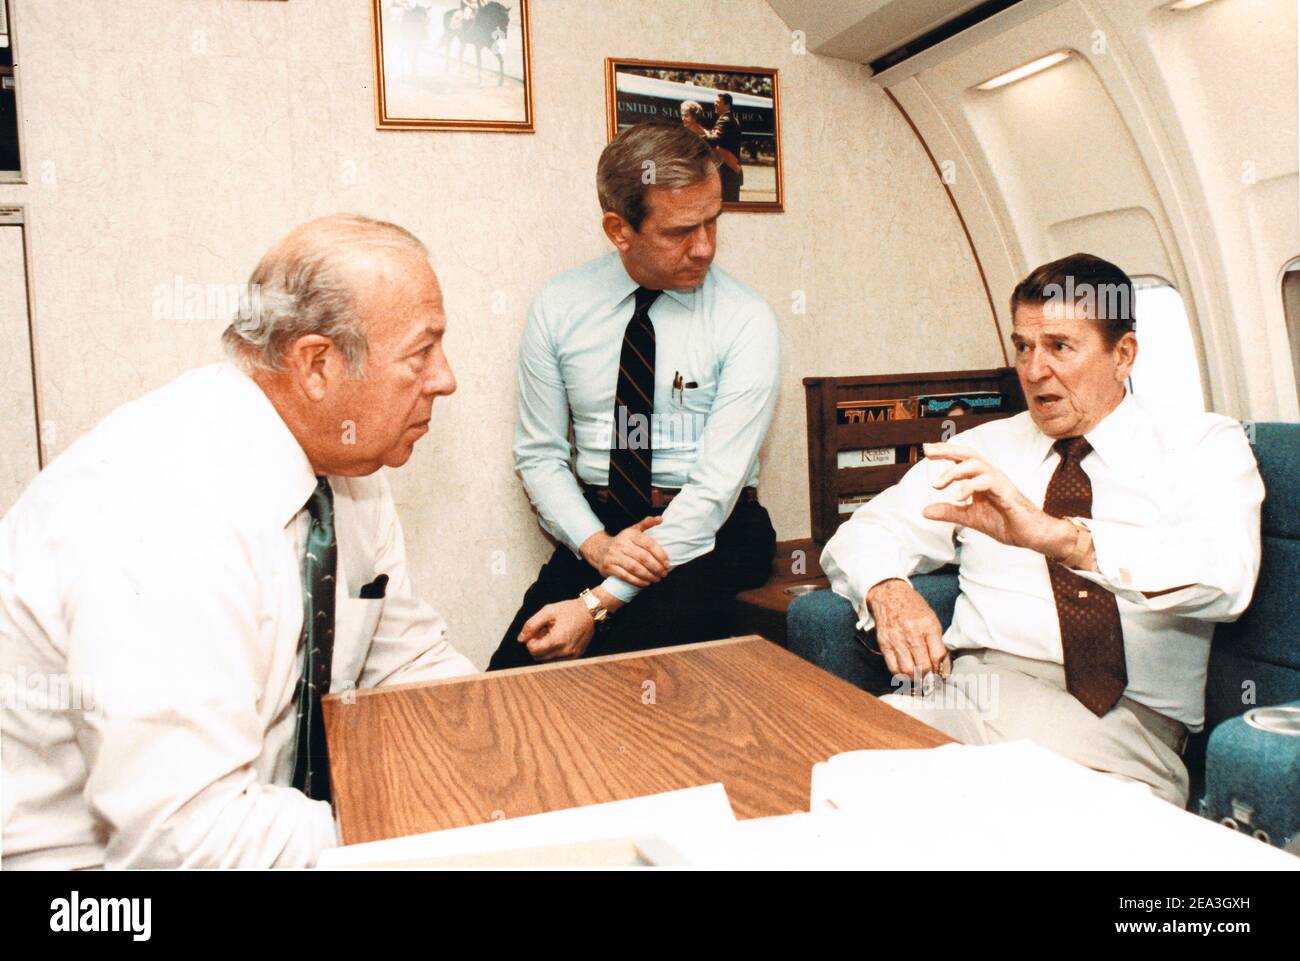 **File Photo** George Shultz Has Passed Away. In this photo released by the White House, United States President Ronald Reagan, right, directs actions to be taken on the situation in Beirut after being briefed aboard Air Force One by US Secretary of State George P. Shultz and National Security Advisor-designate Robert McFarlane on October 23, 1983. Mandatory Credit: Bill Fitz-Patrick/White House via CNP/MediaPunch Stock Photo